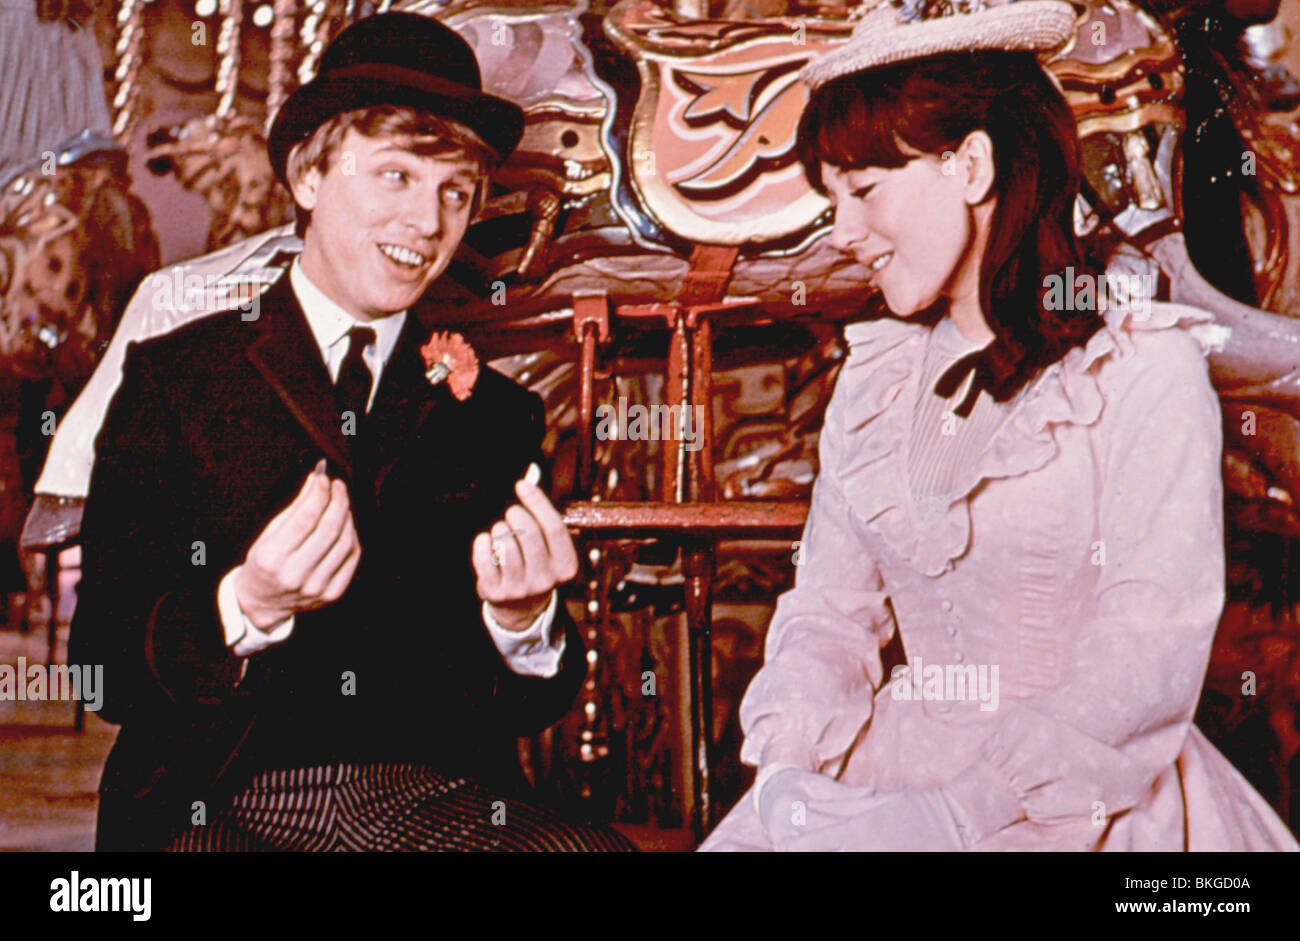 HALF A SIXPENCE (1967) TOMMY STEELE, JULIA FOSTER HFS 014 Stock Photo